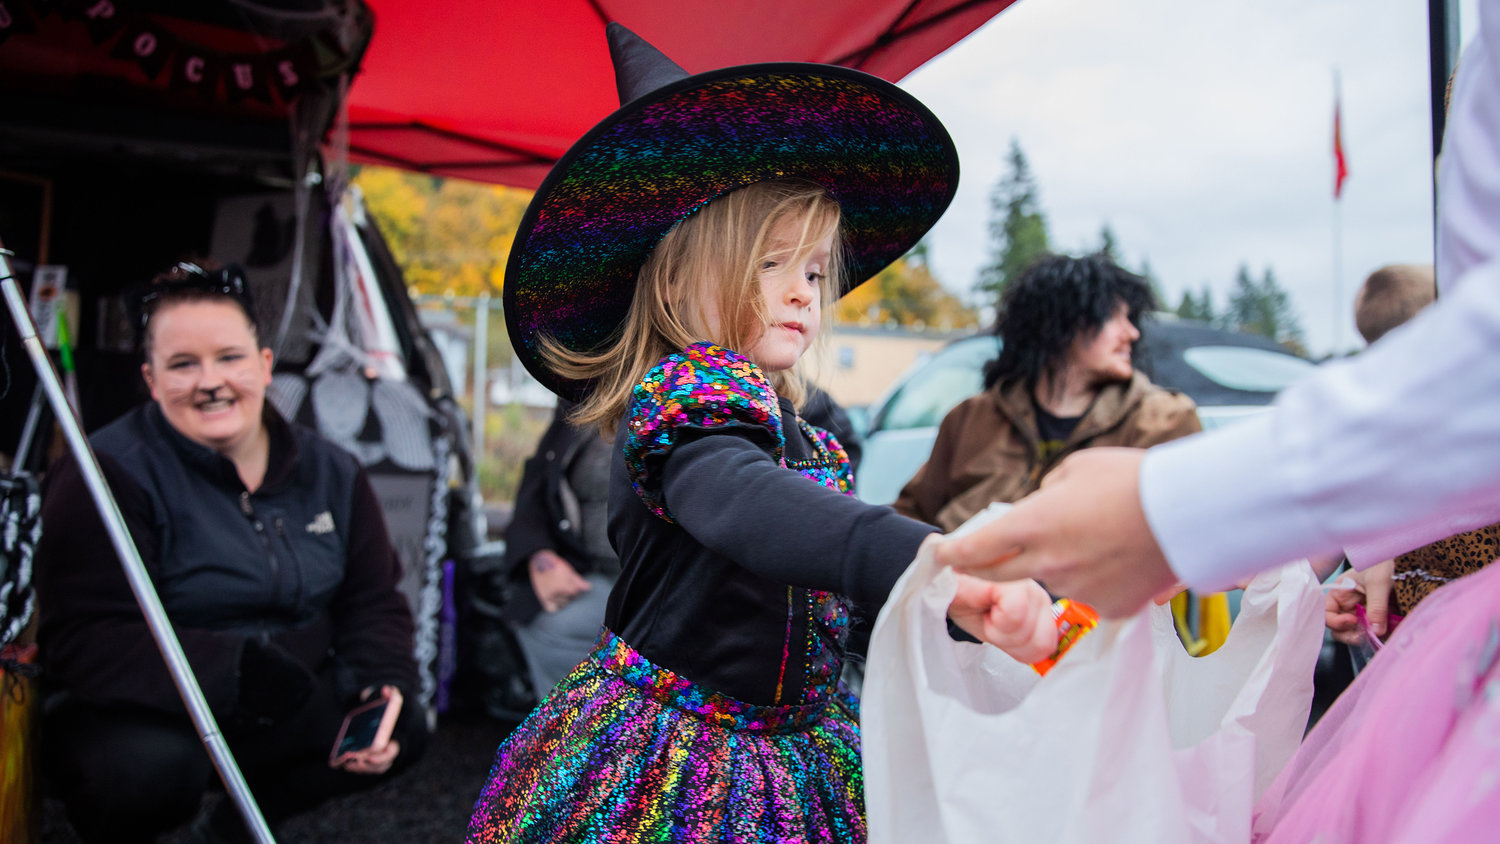 Kinzlee Banker, 4, of Winlock, hands out candy to trick-or-treaters during Egg-O-Lantern festivities on Halloween.